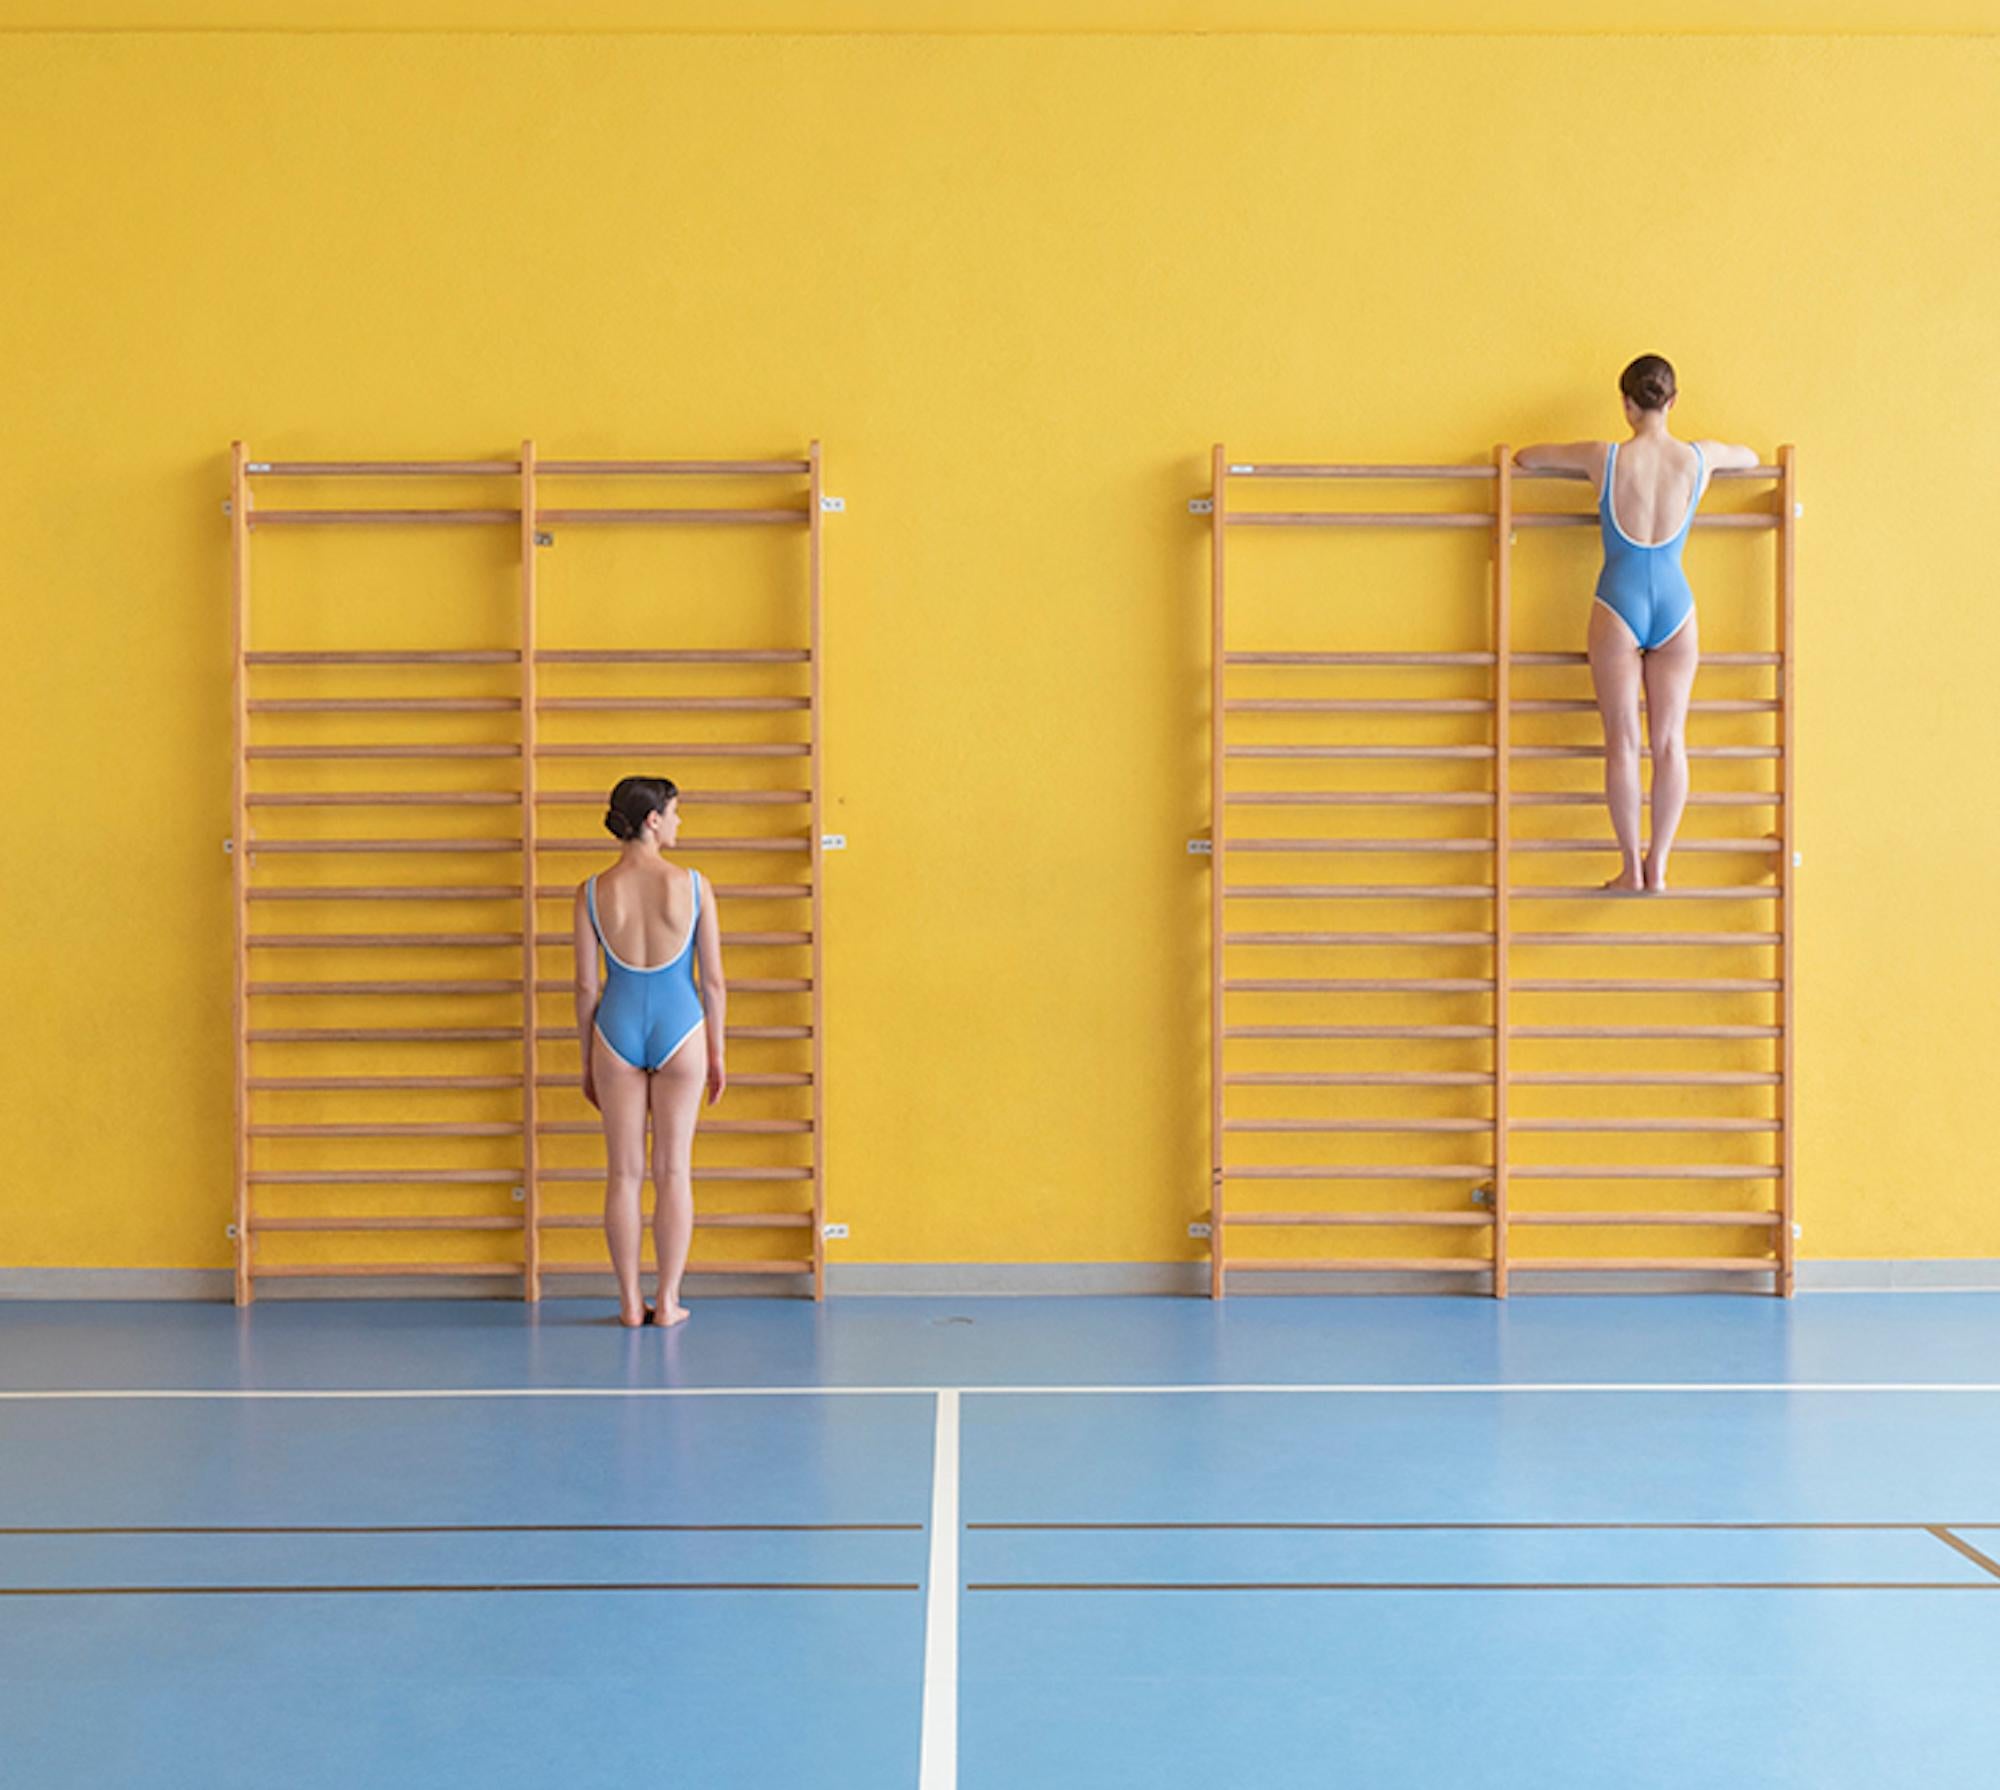 Alter n°1 by Camille Brasselet - Contemporary fine art photography, sport, gym For Sale 2